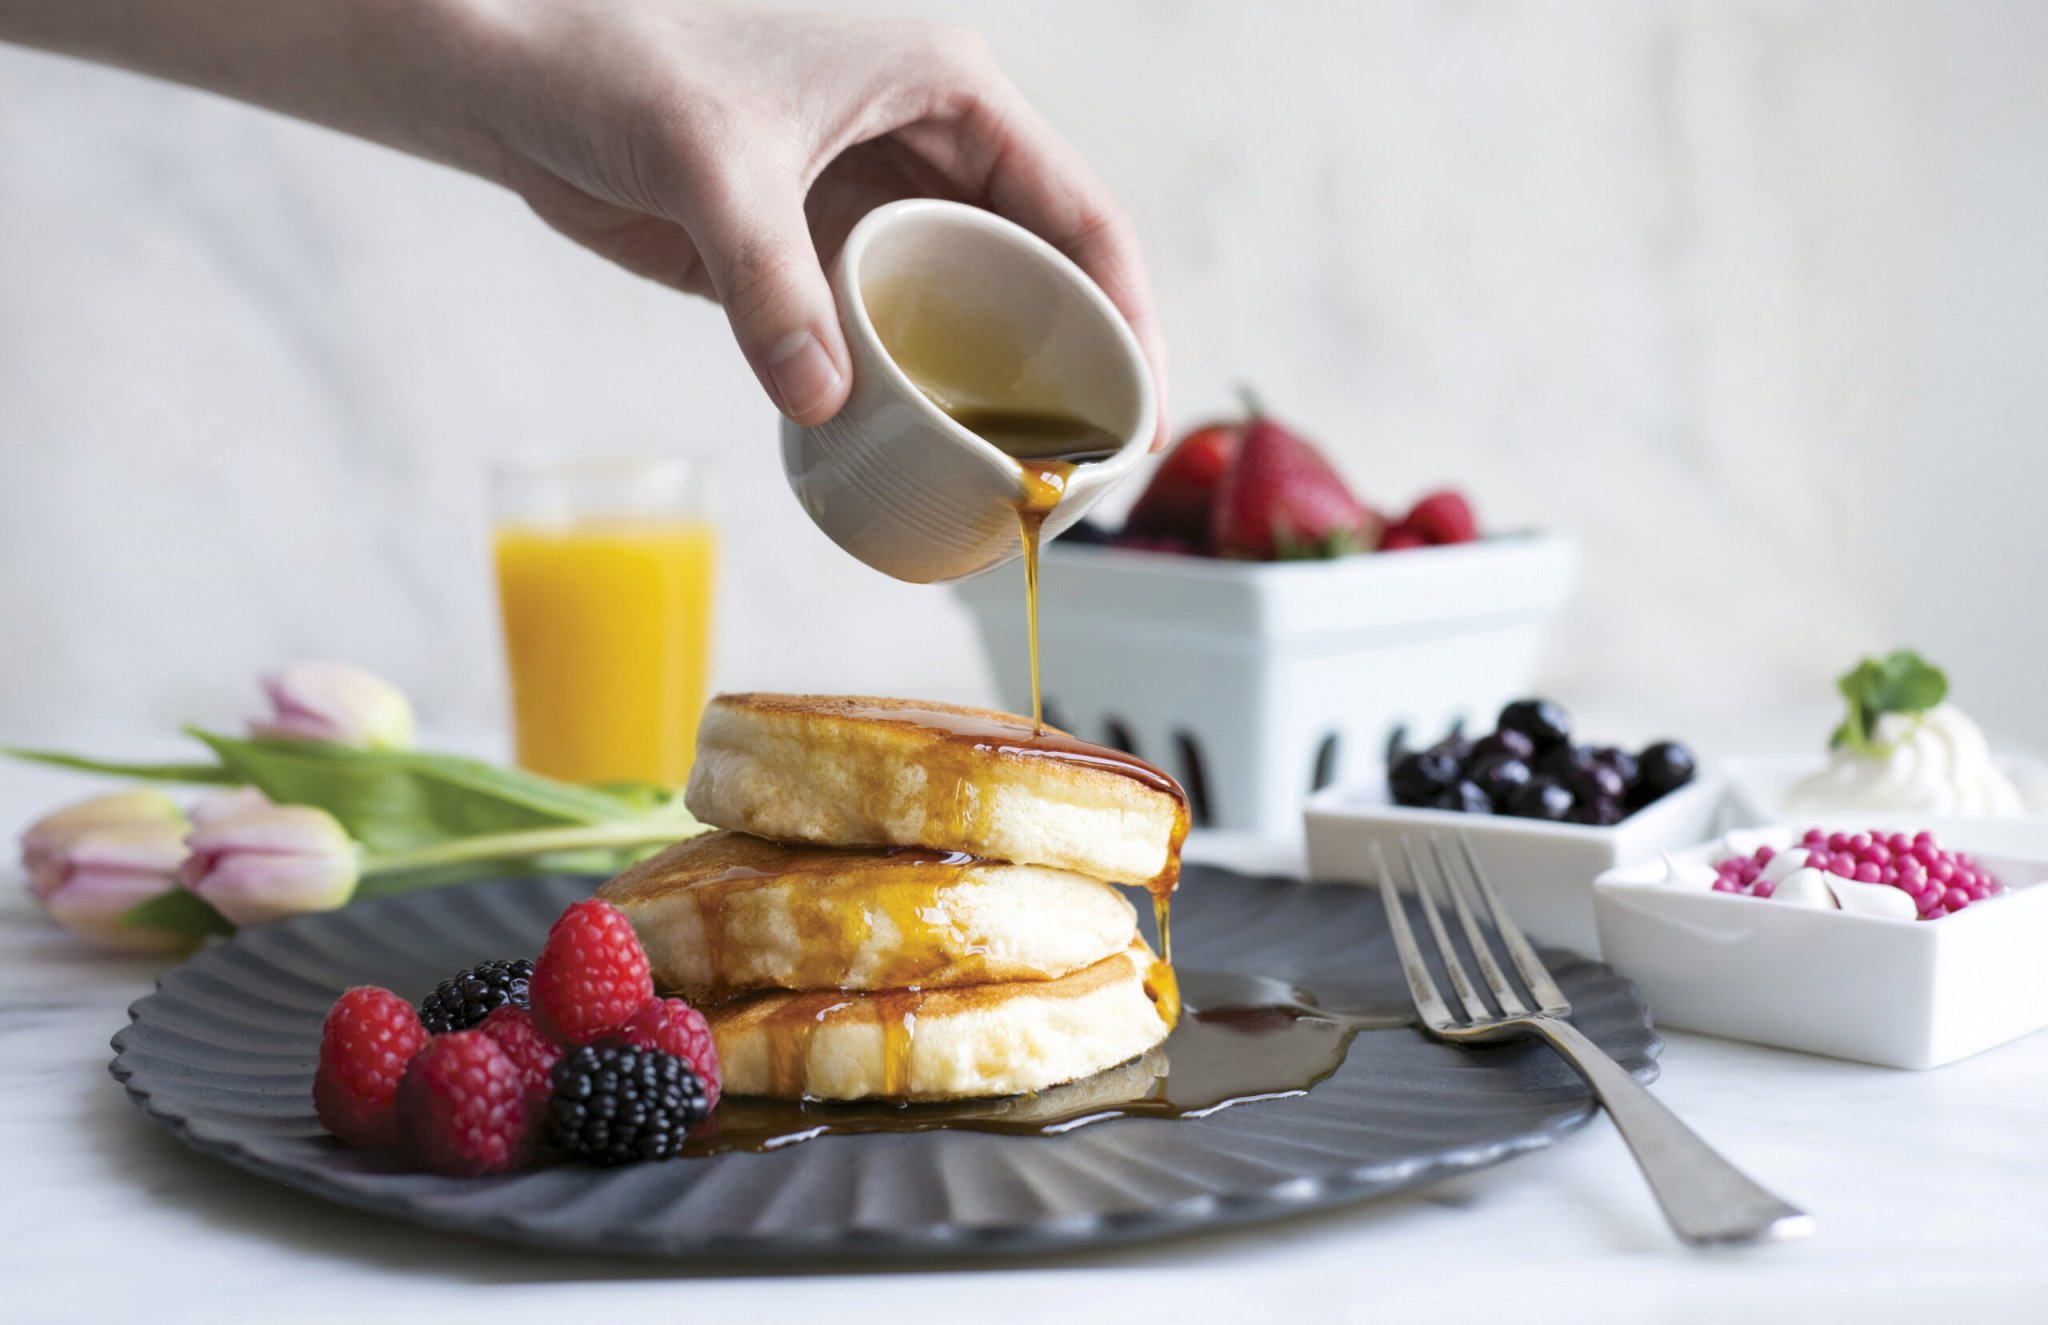 The Best Fluffy Pancake Recipe From Chef-Instructor Ben Kiely